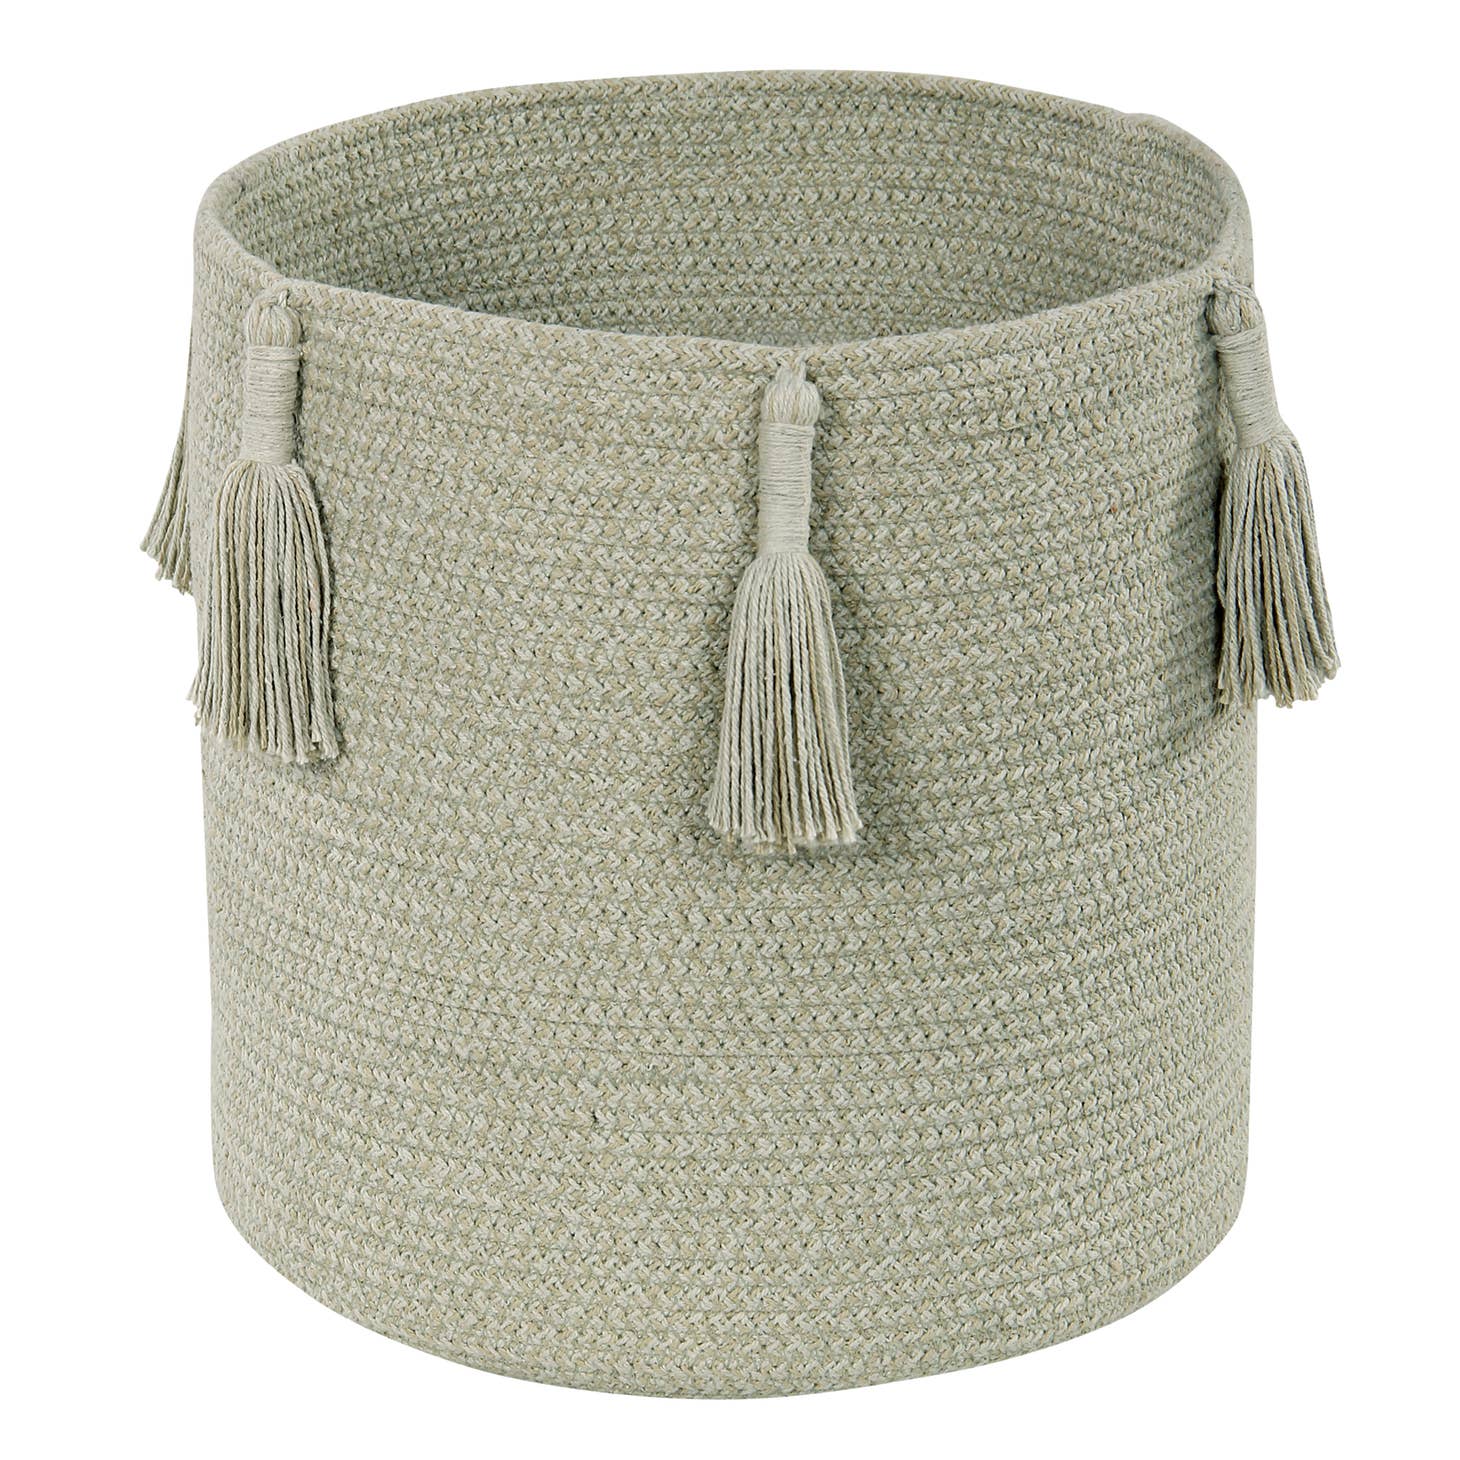 Lorena Canals Woody Basket - Olive